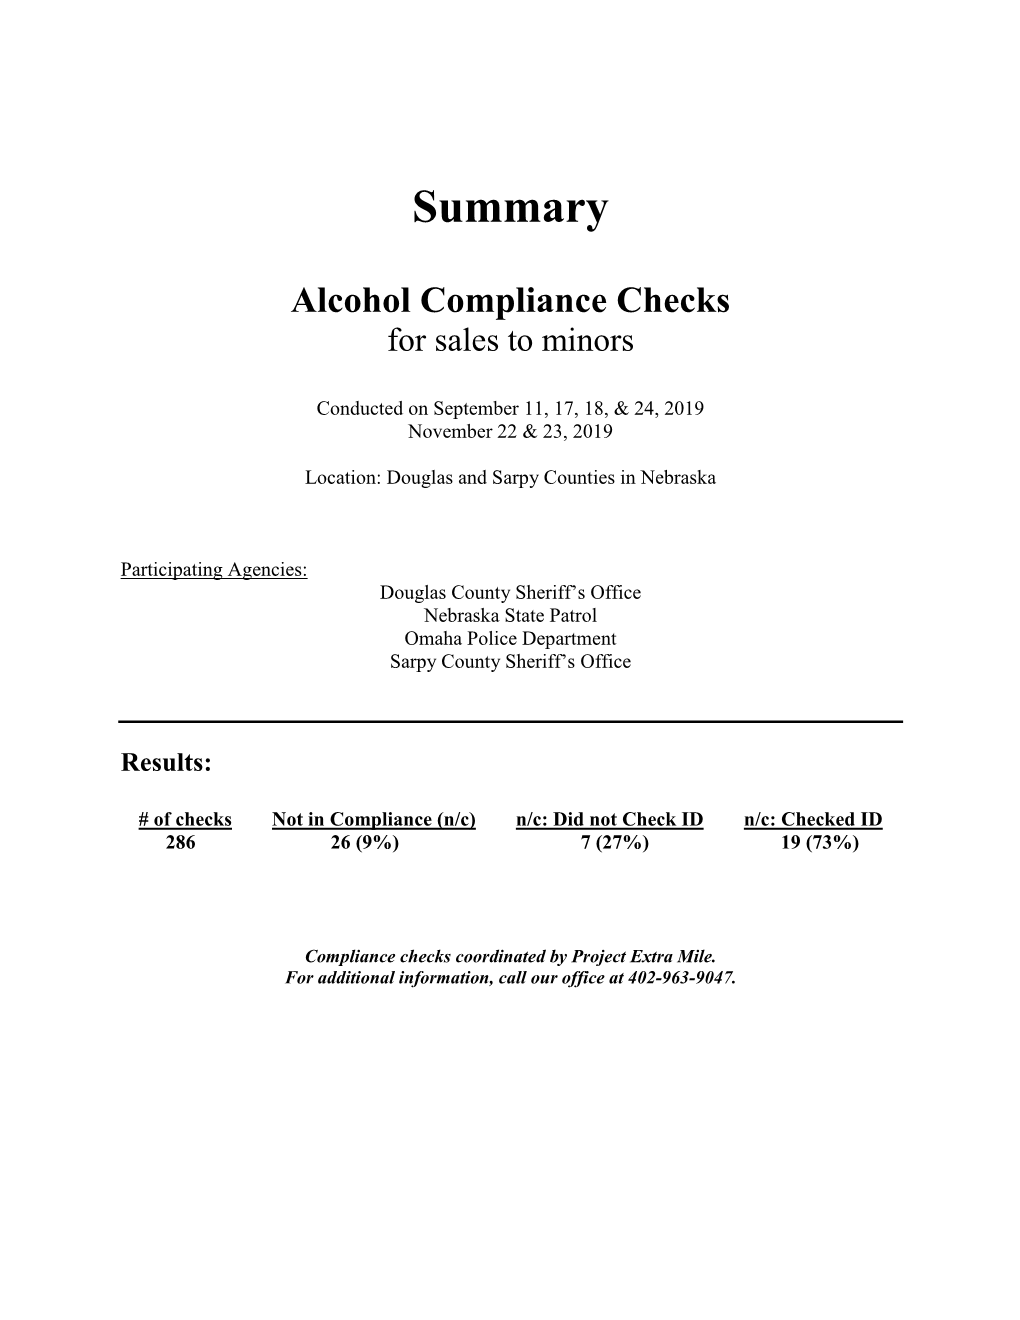 Project Extra Mile – Alcohol Compliance Checks